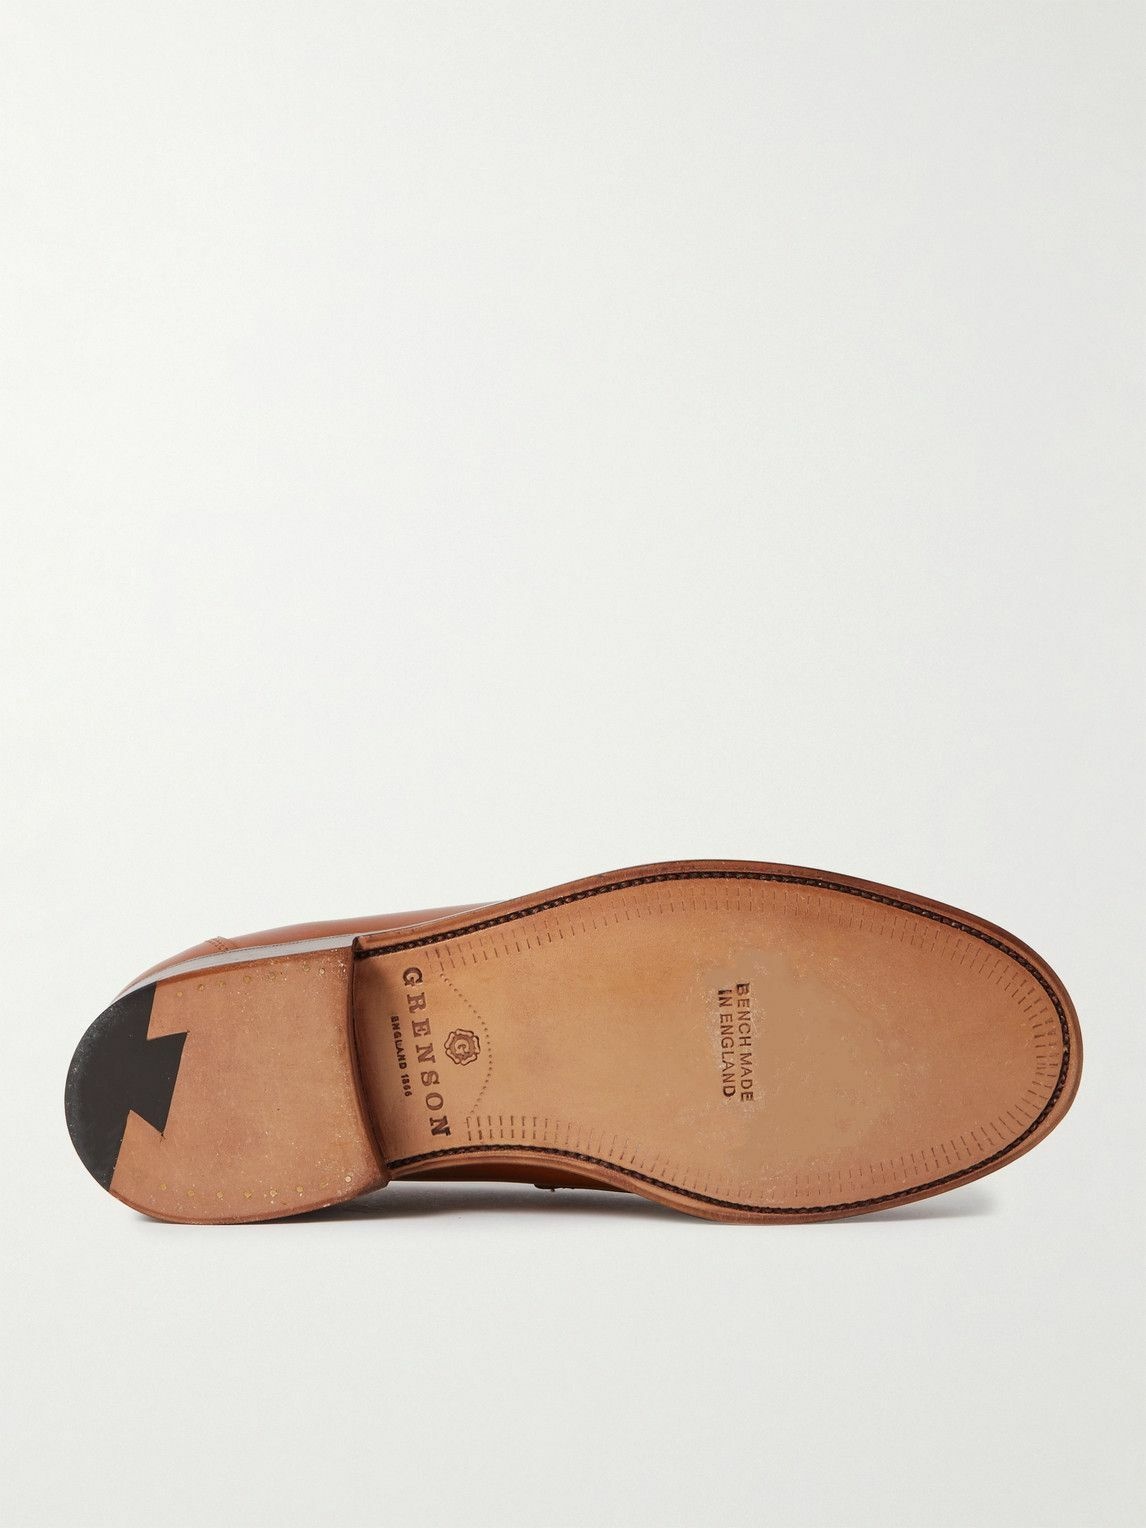 Grenson - Epsom Two-Tone Leather Penny Loafers - Brown Grenson